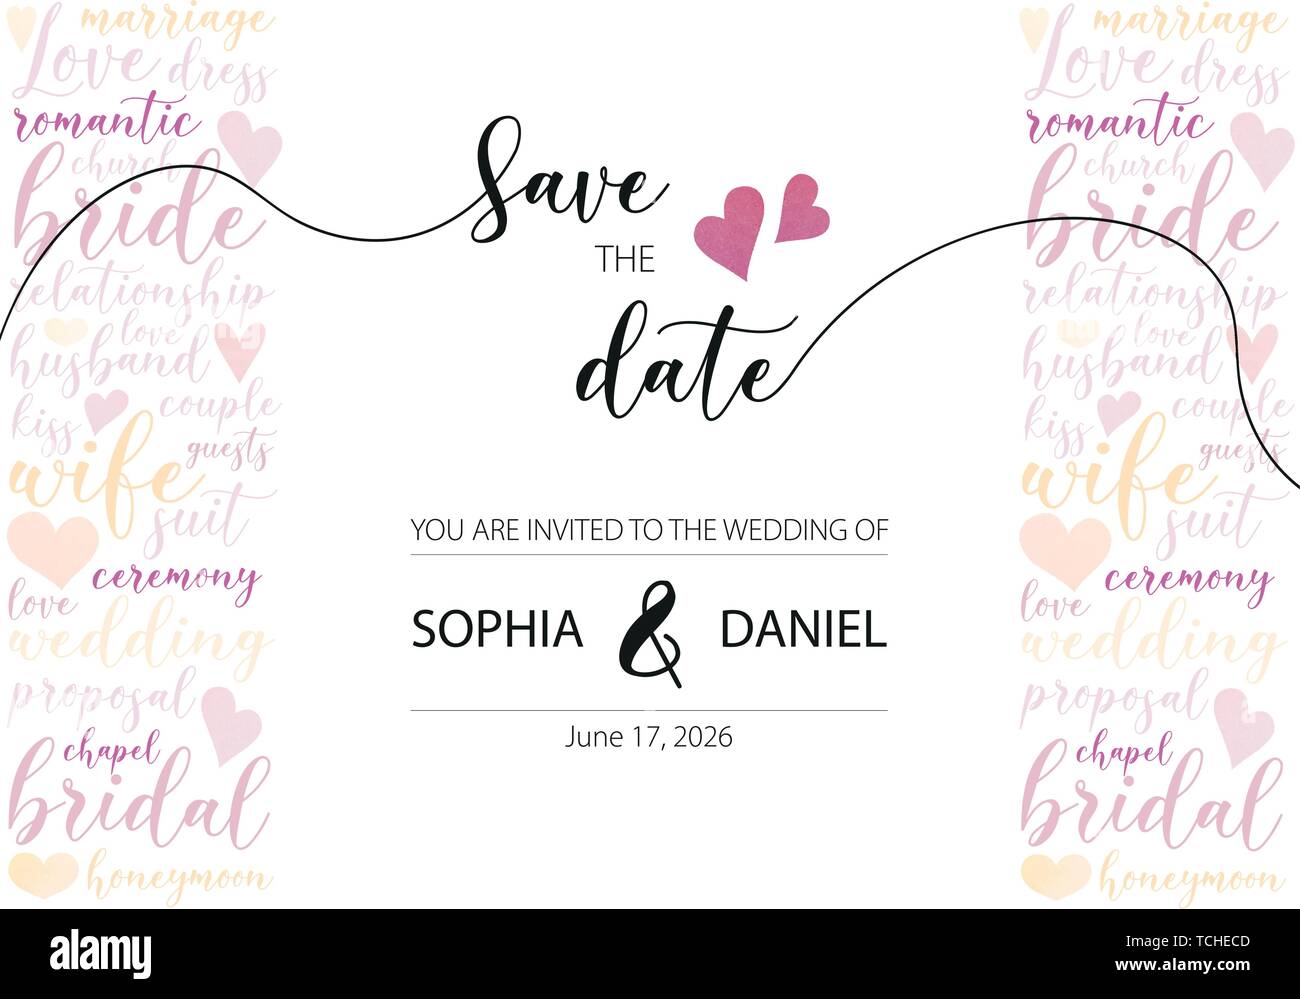 save the date vector with wedding word cloud Stock Vector